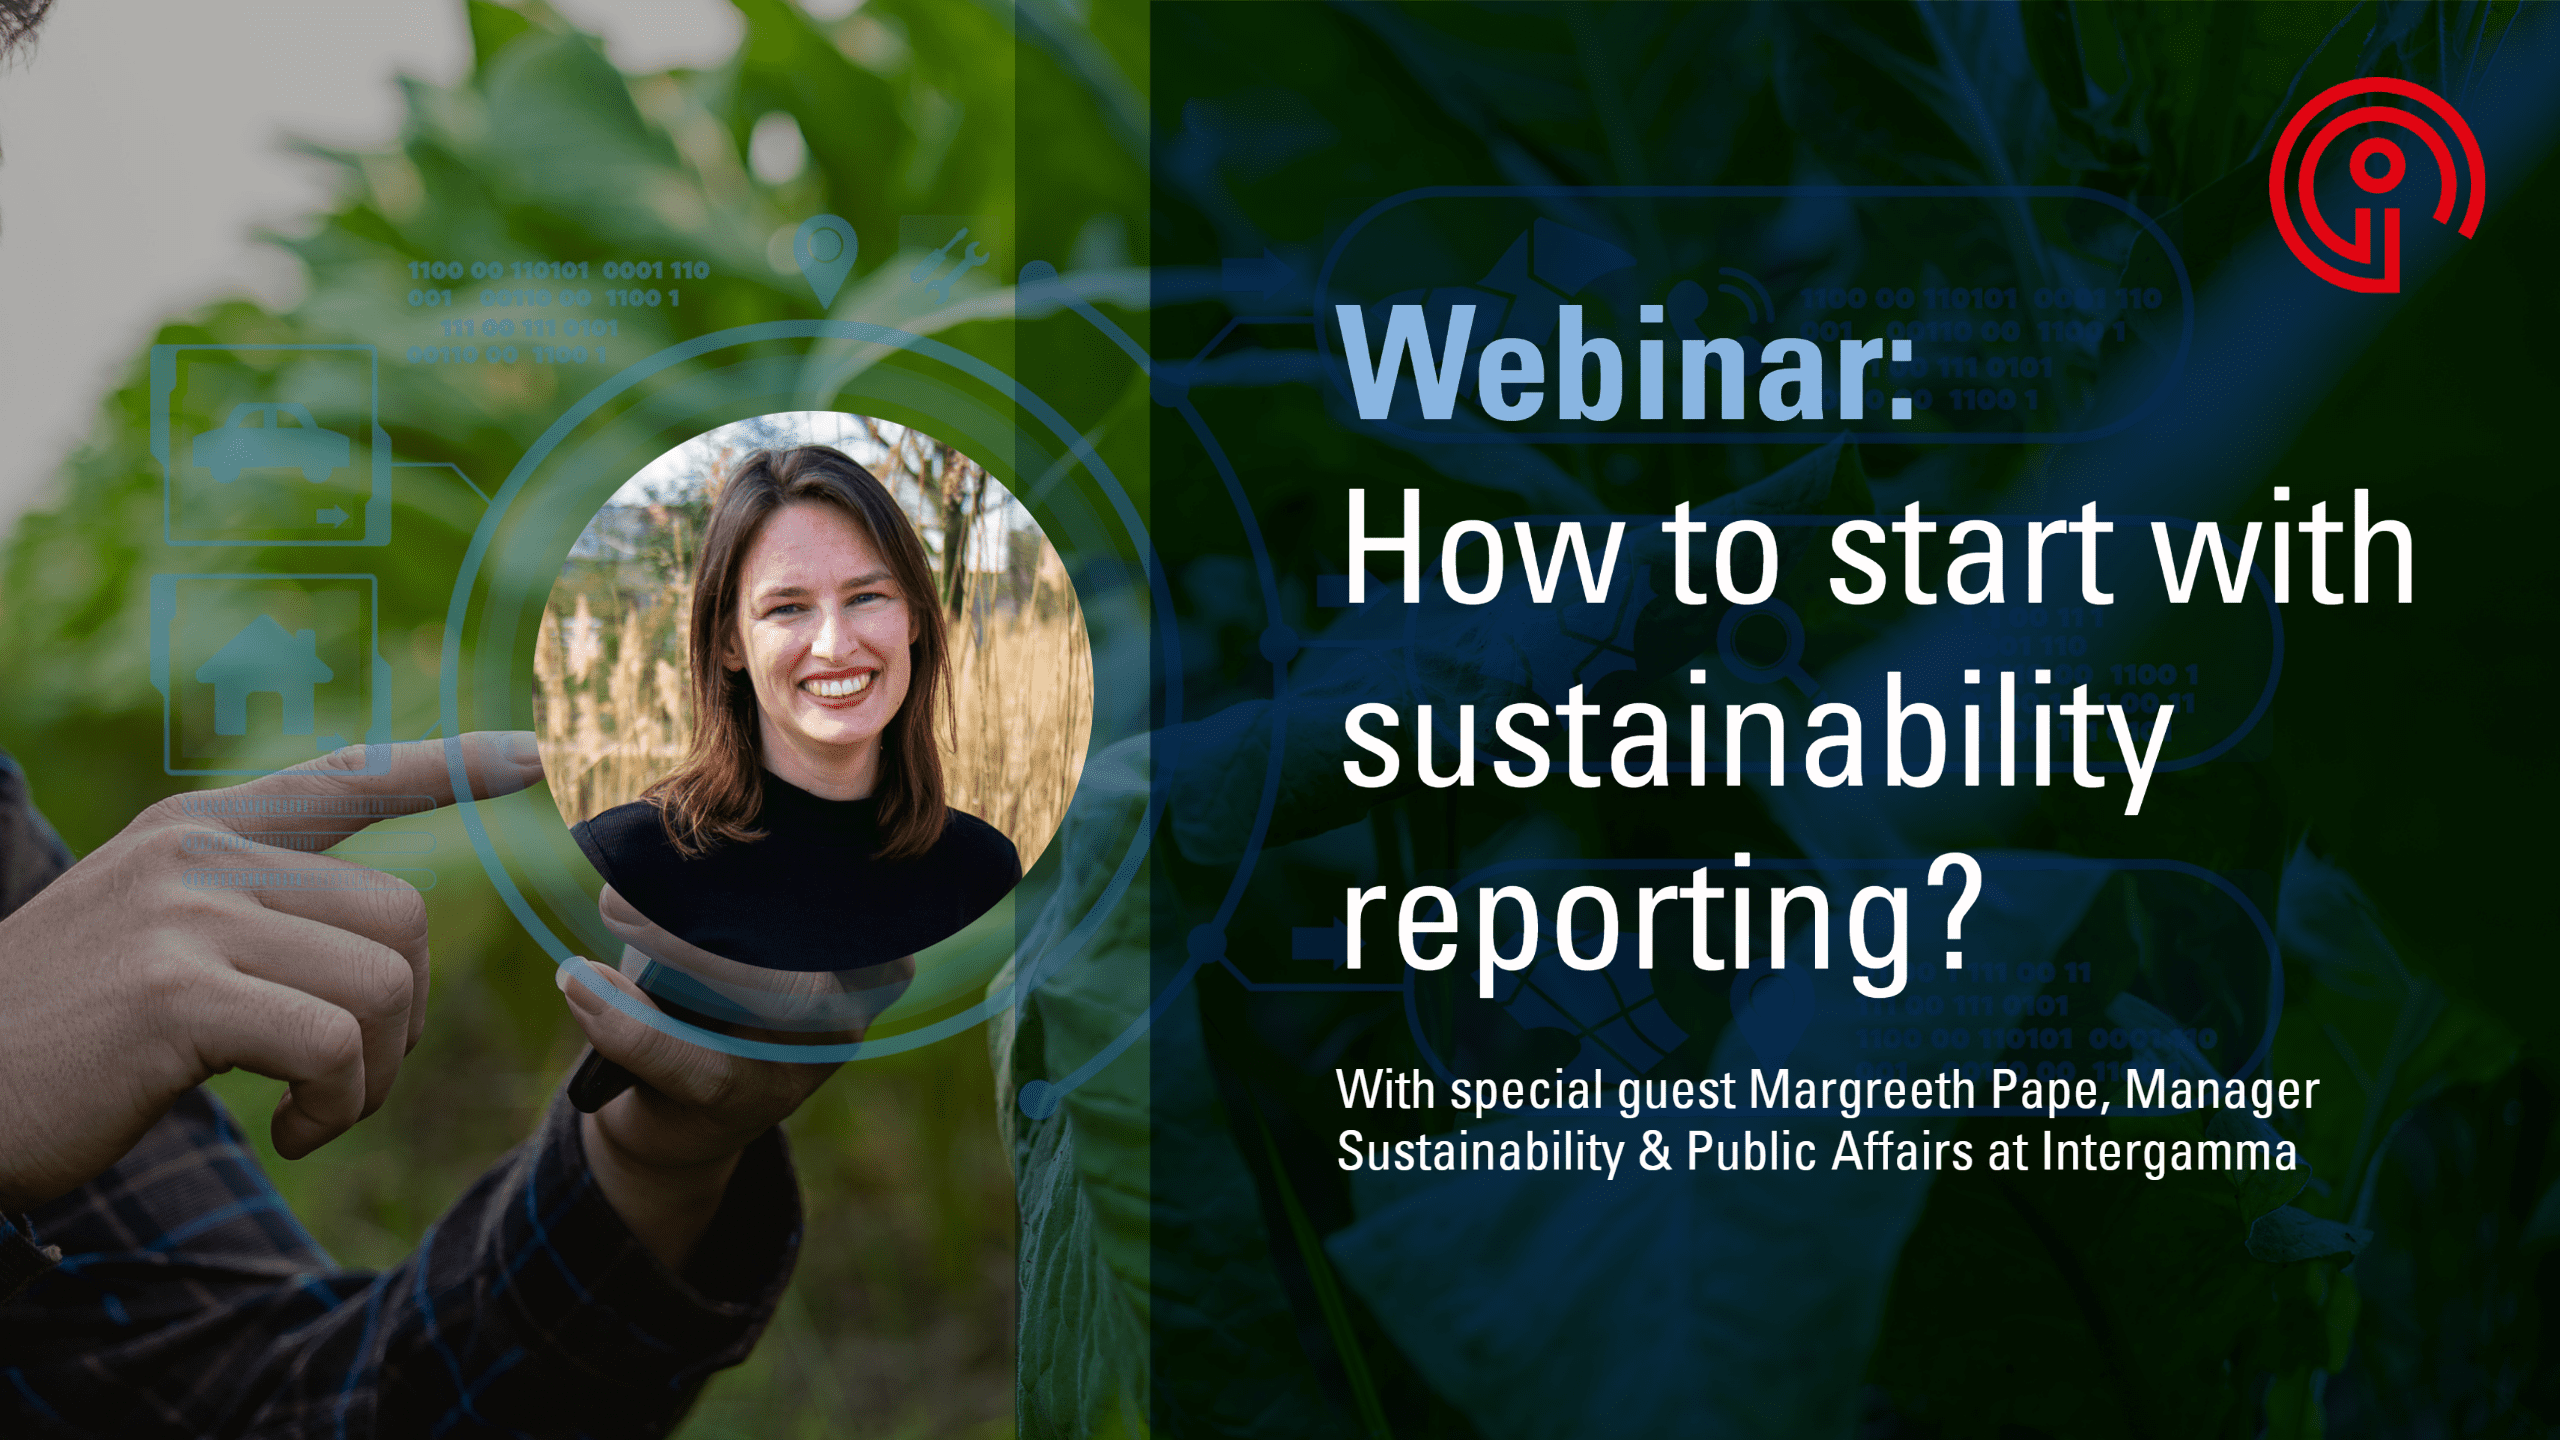 Webinar 'How to start with sustainability reporting?'